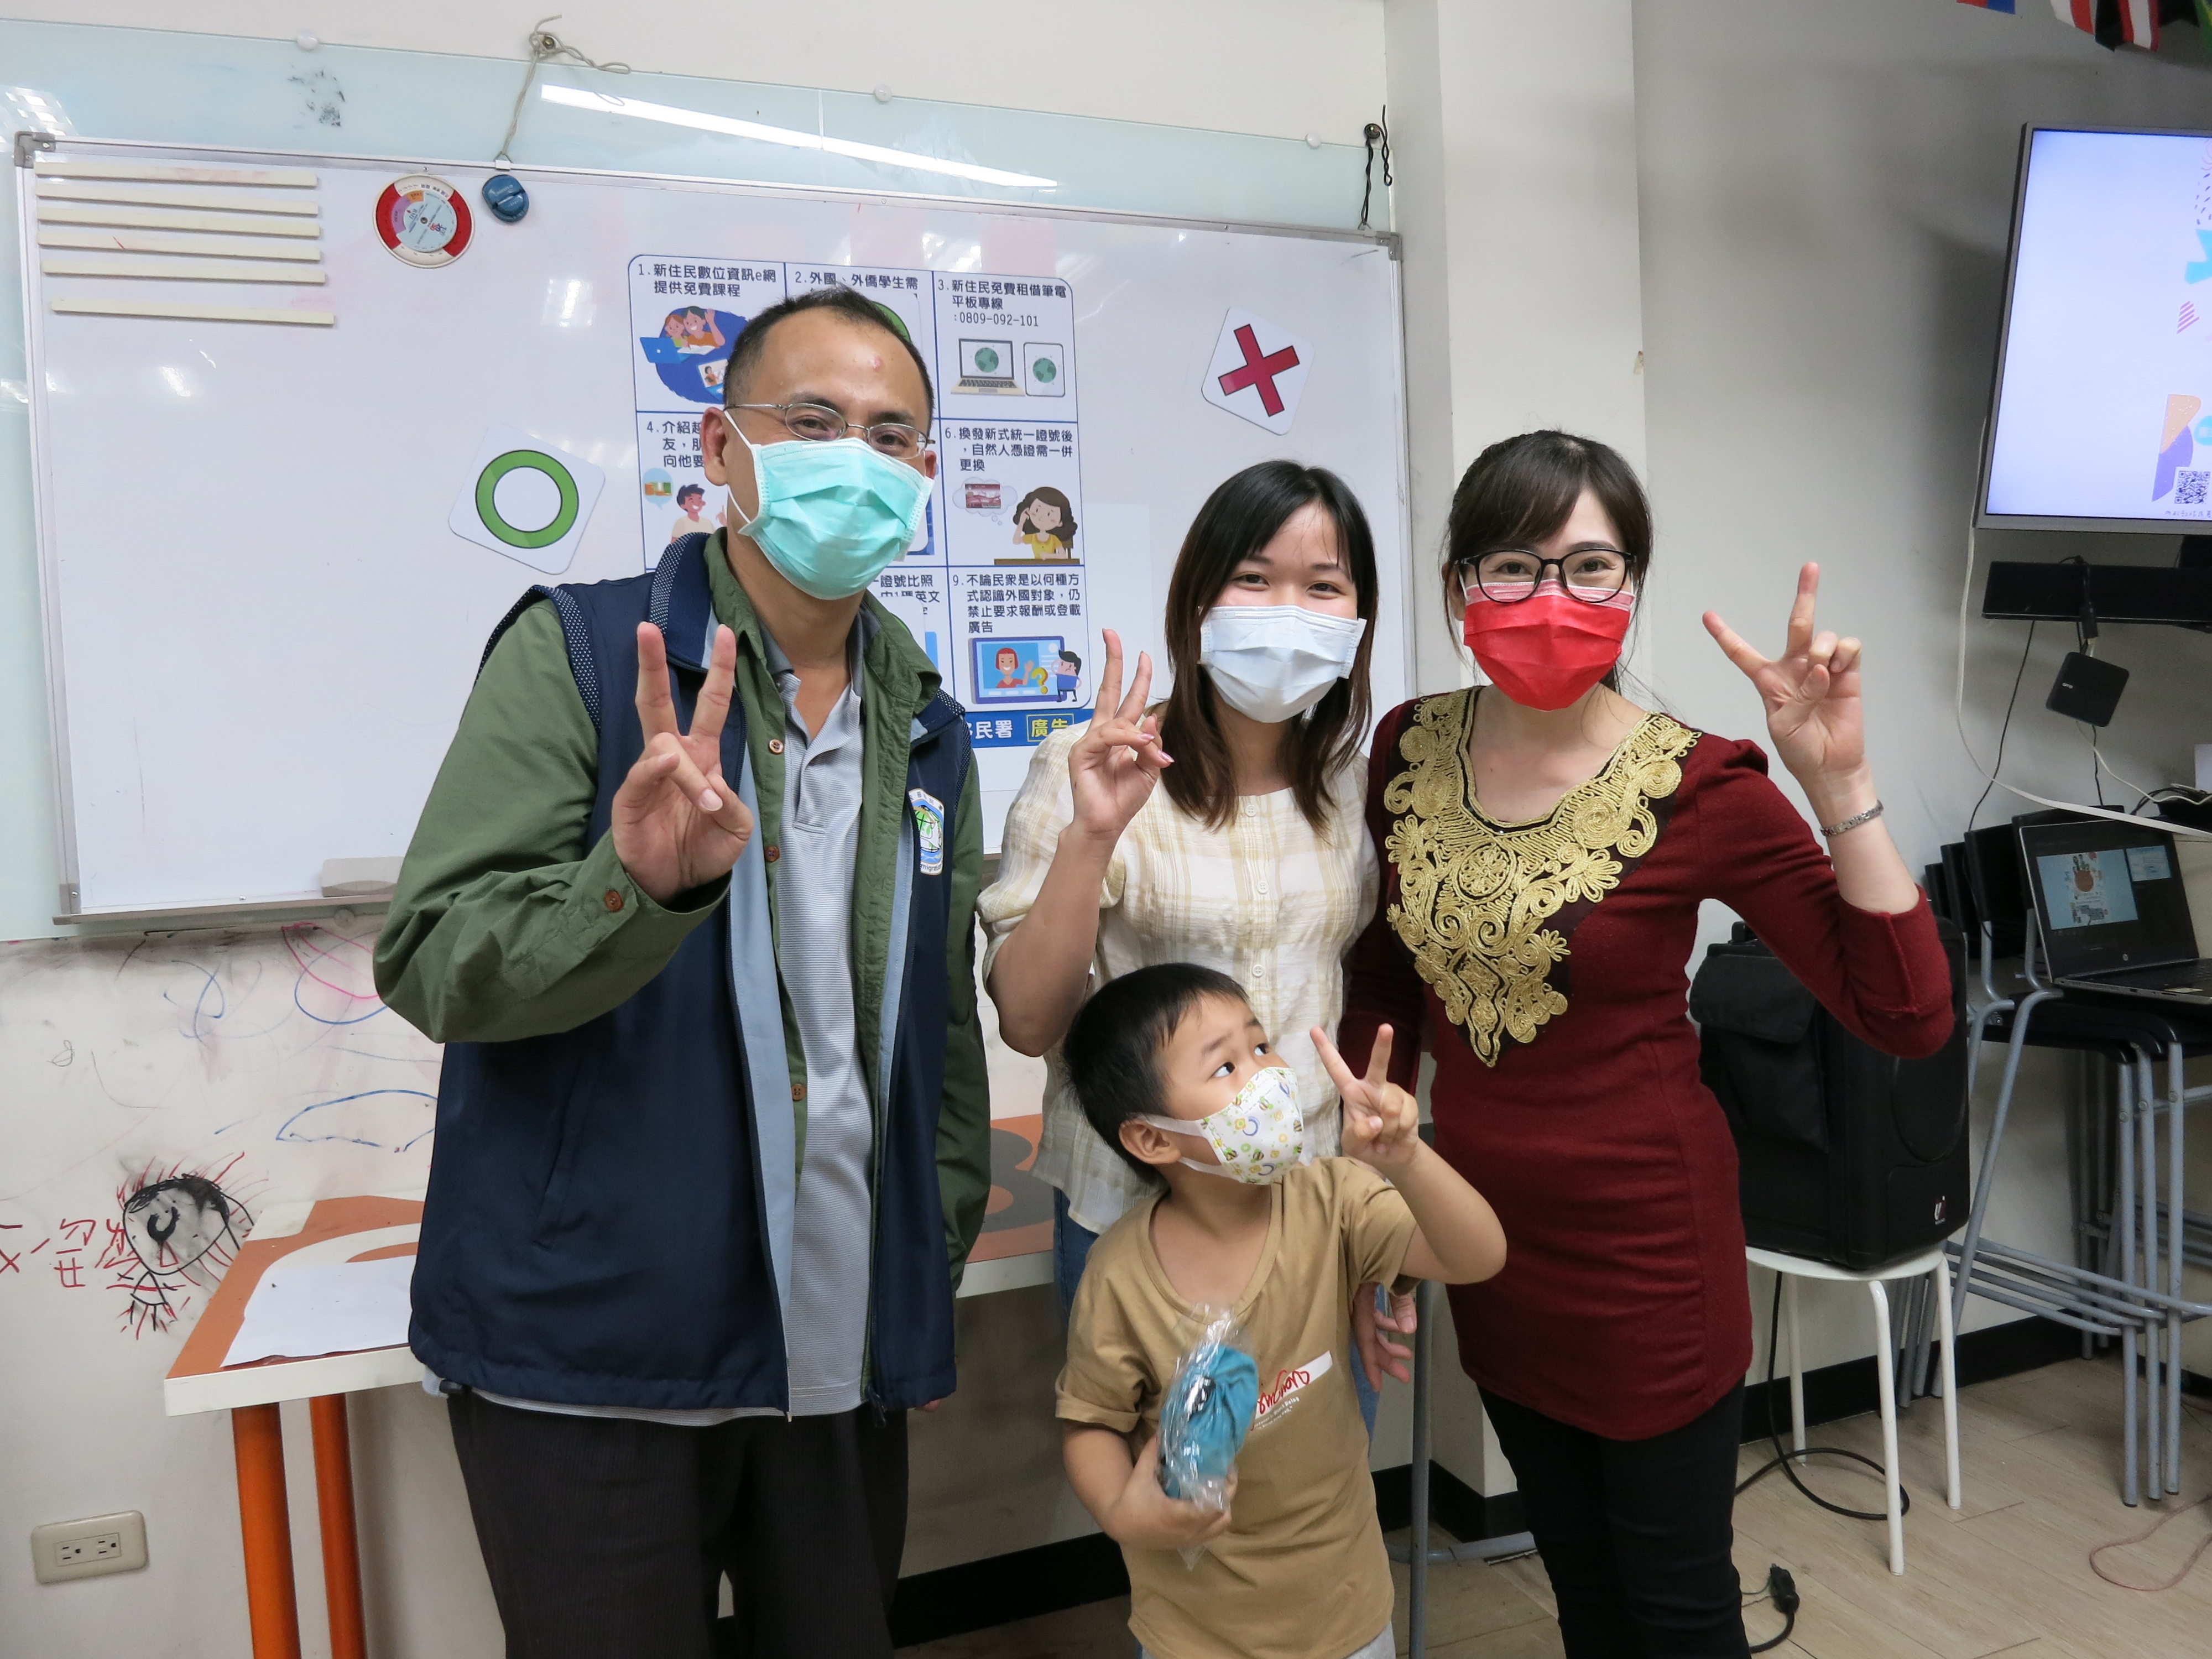 Li Yun Xuan, a new immigrant from Vietnam, participated in the event with her 5-year-old child. (Photo / Provided by the Chiayi City Service Center)